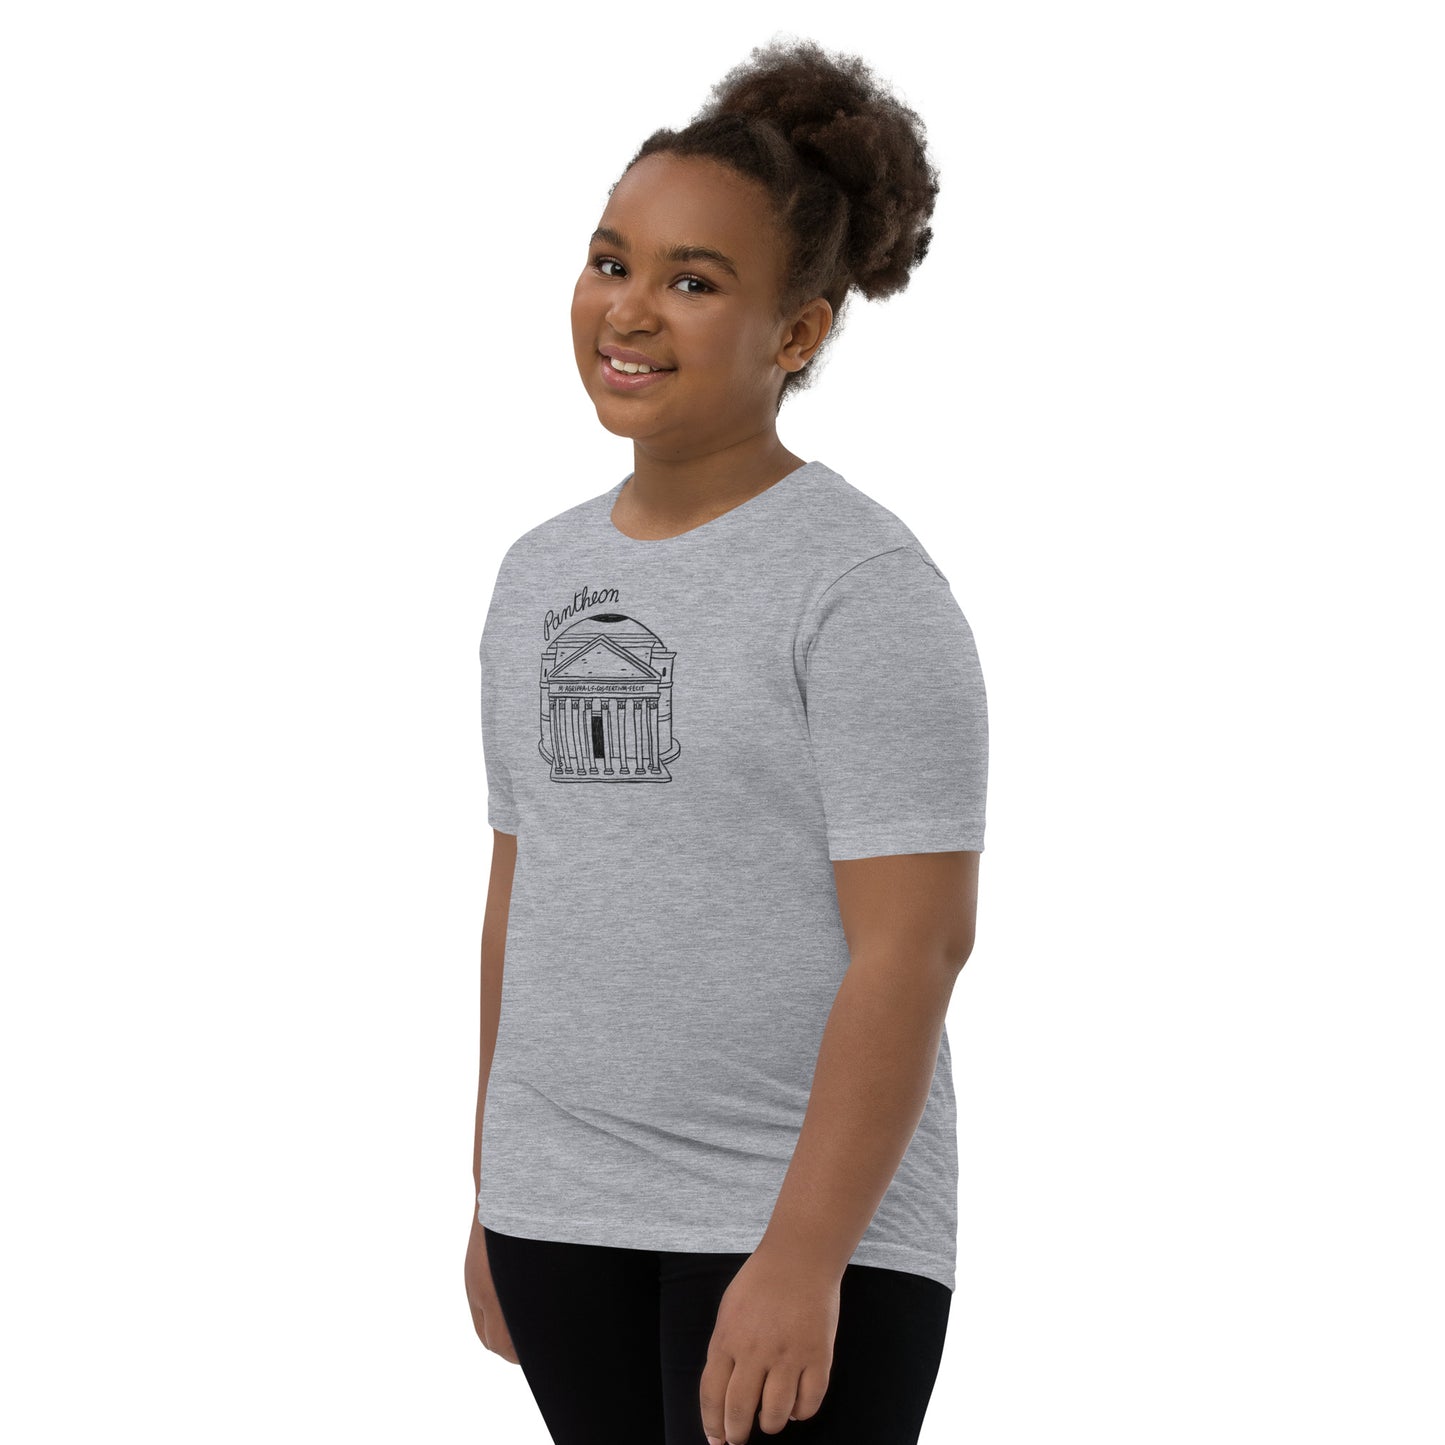 Pantheon on a Youth Short Sleeve T-Shirt